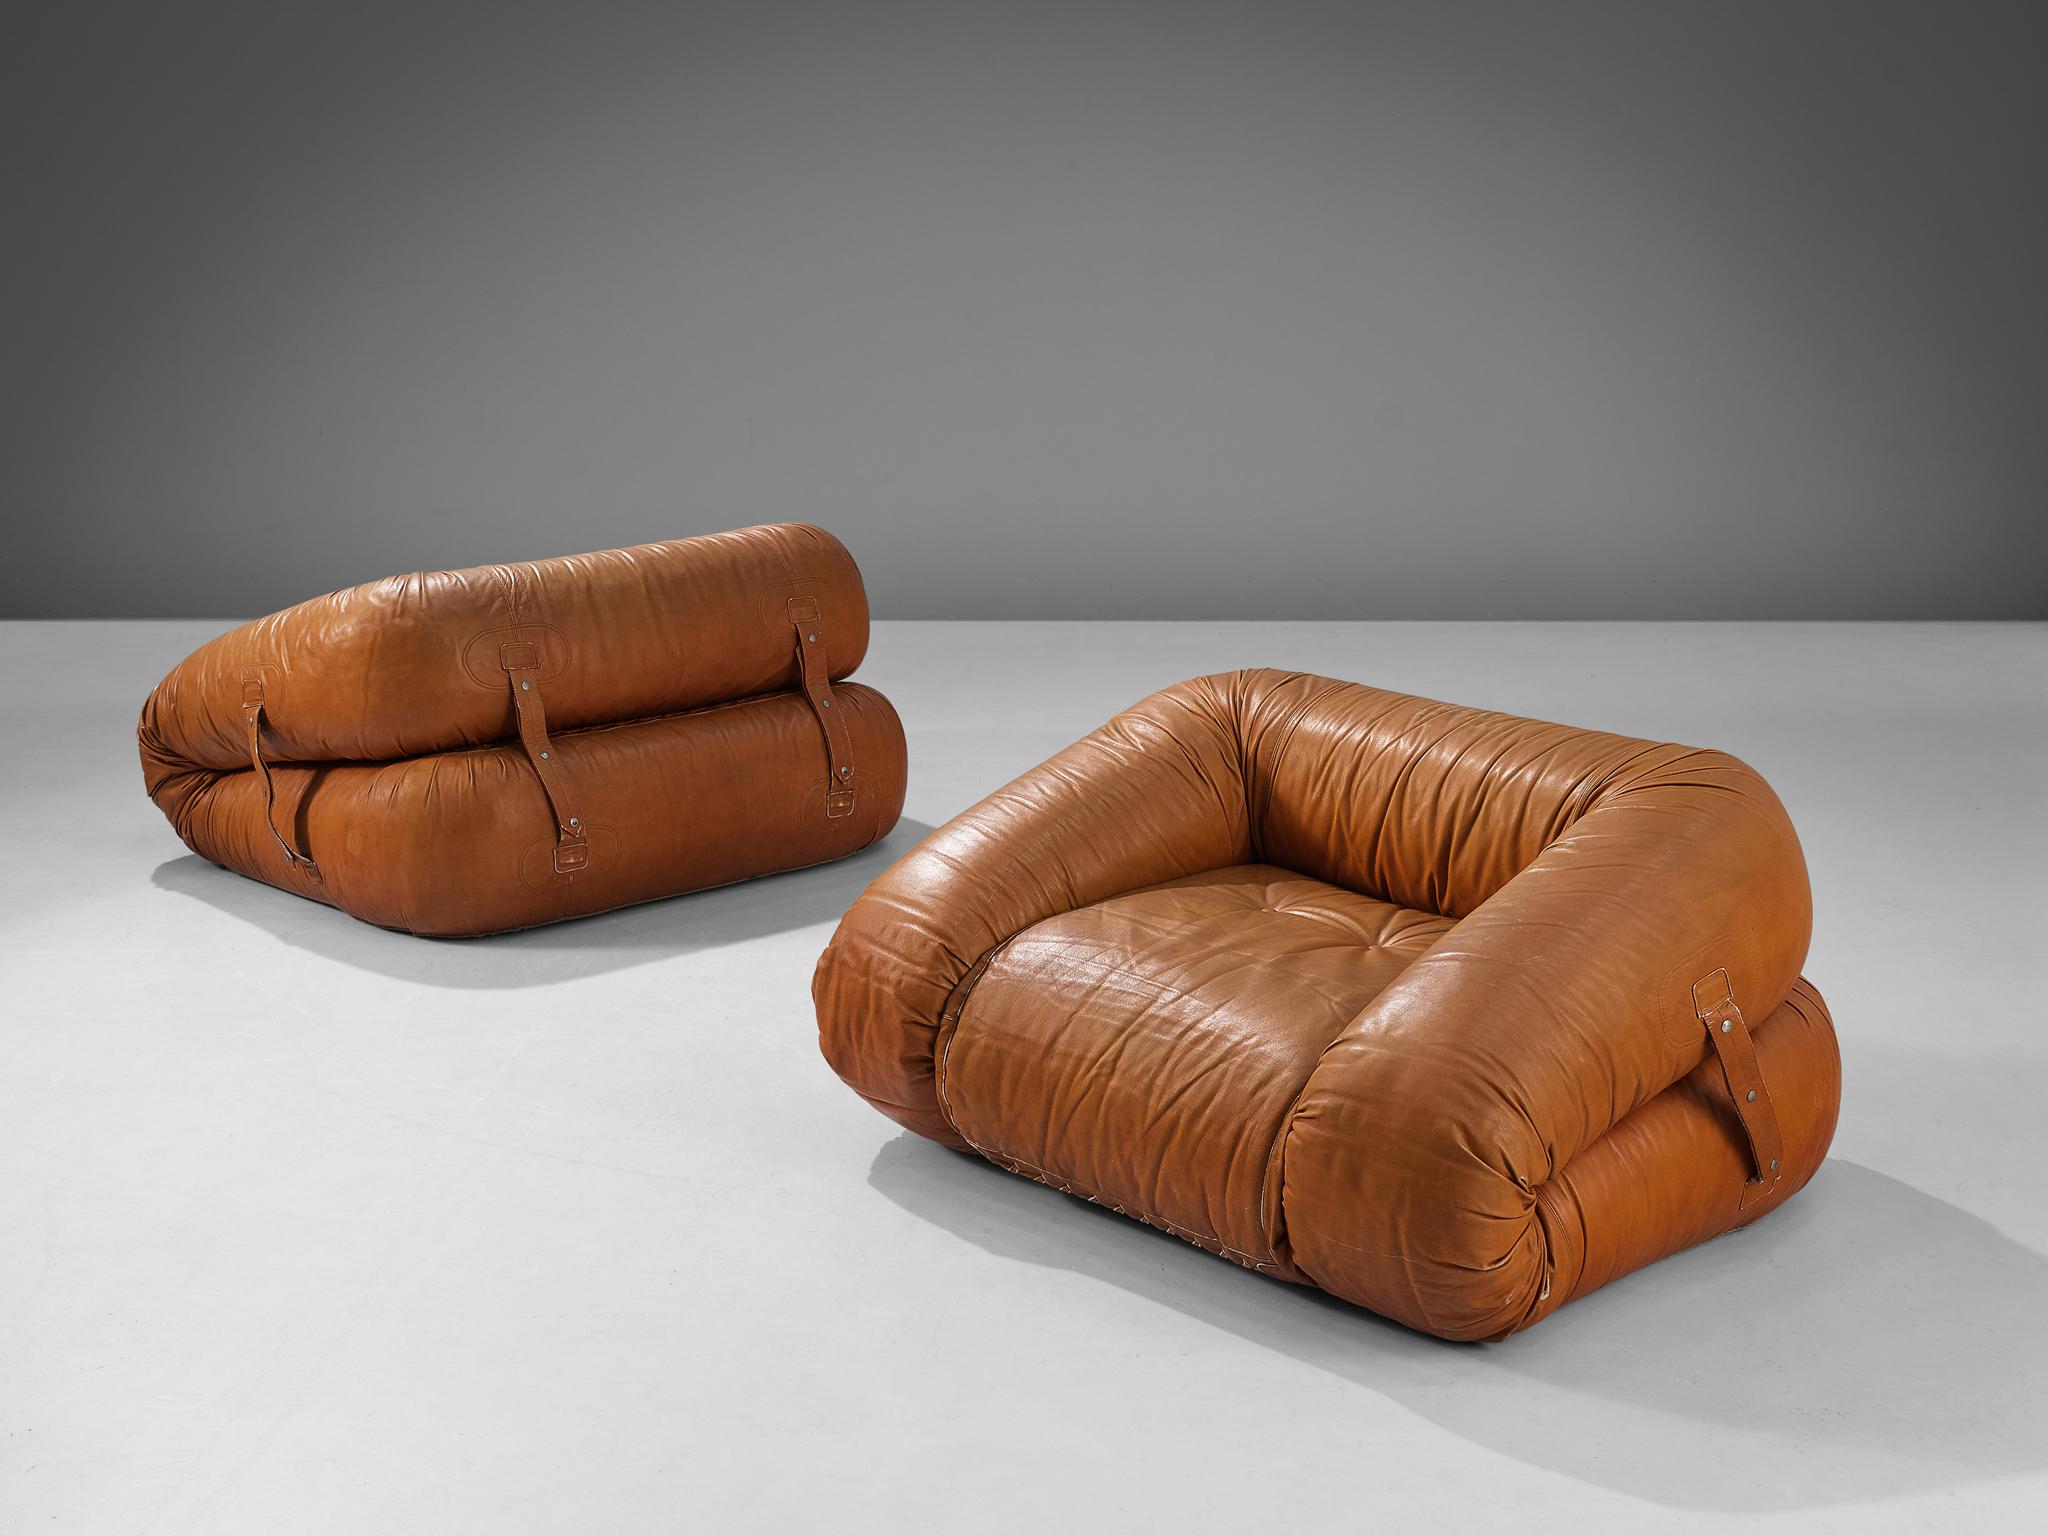 Alessandro Becchi for Giovanetti, 'Anfibio' lounge chairs, leather, Italy, 1970s.

These rare 